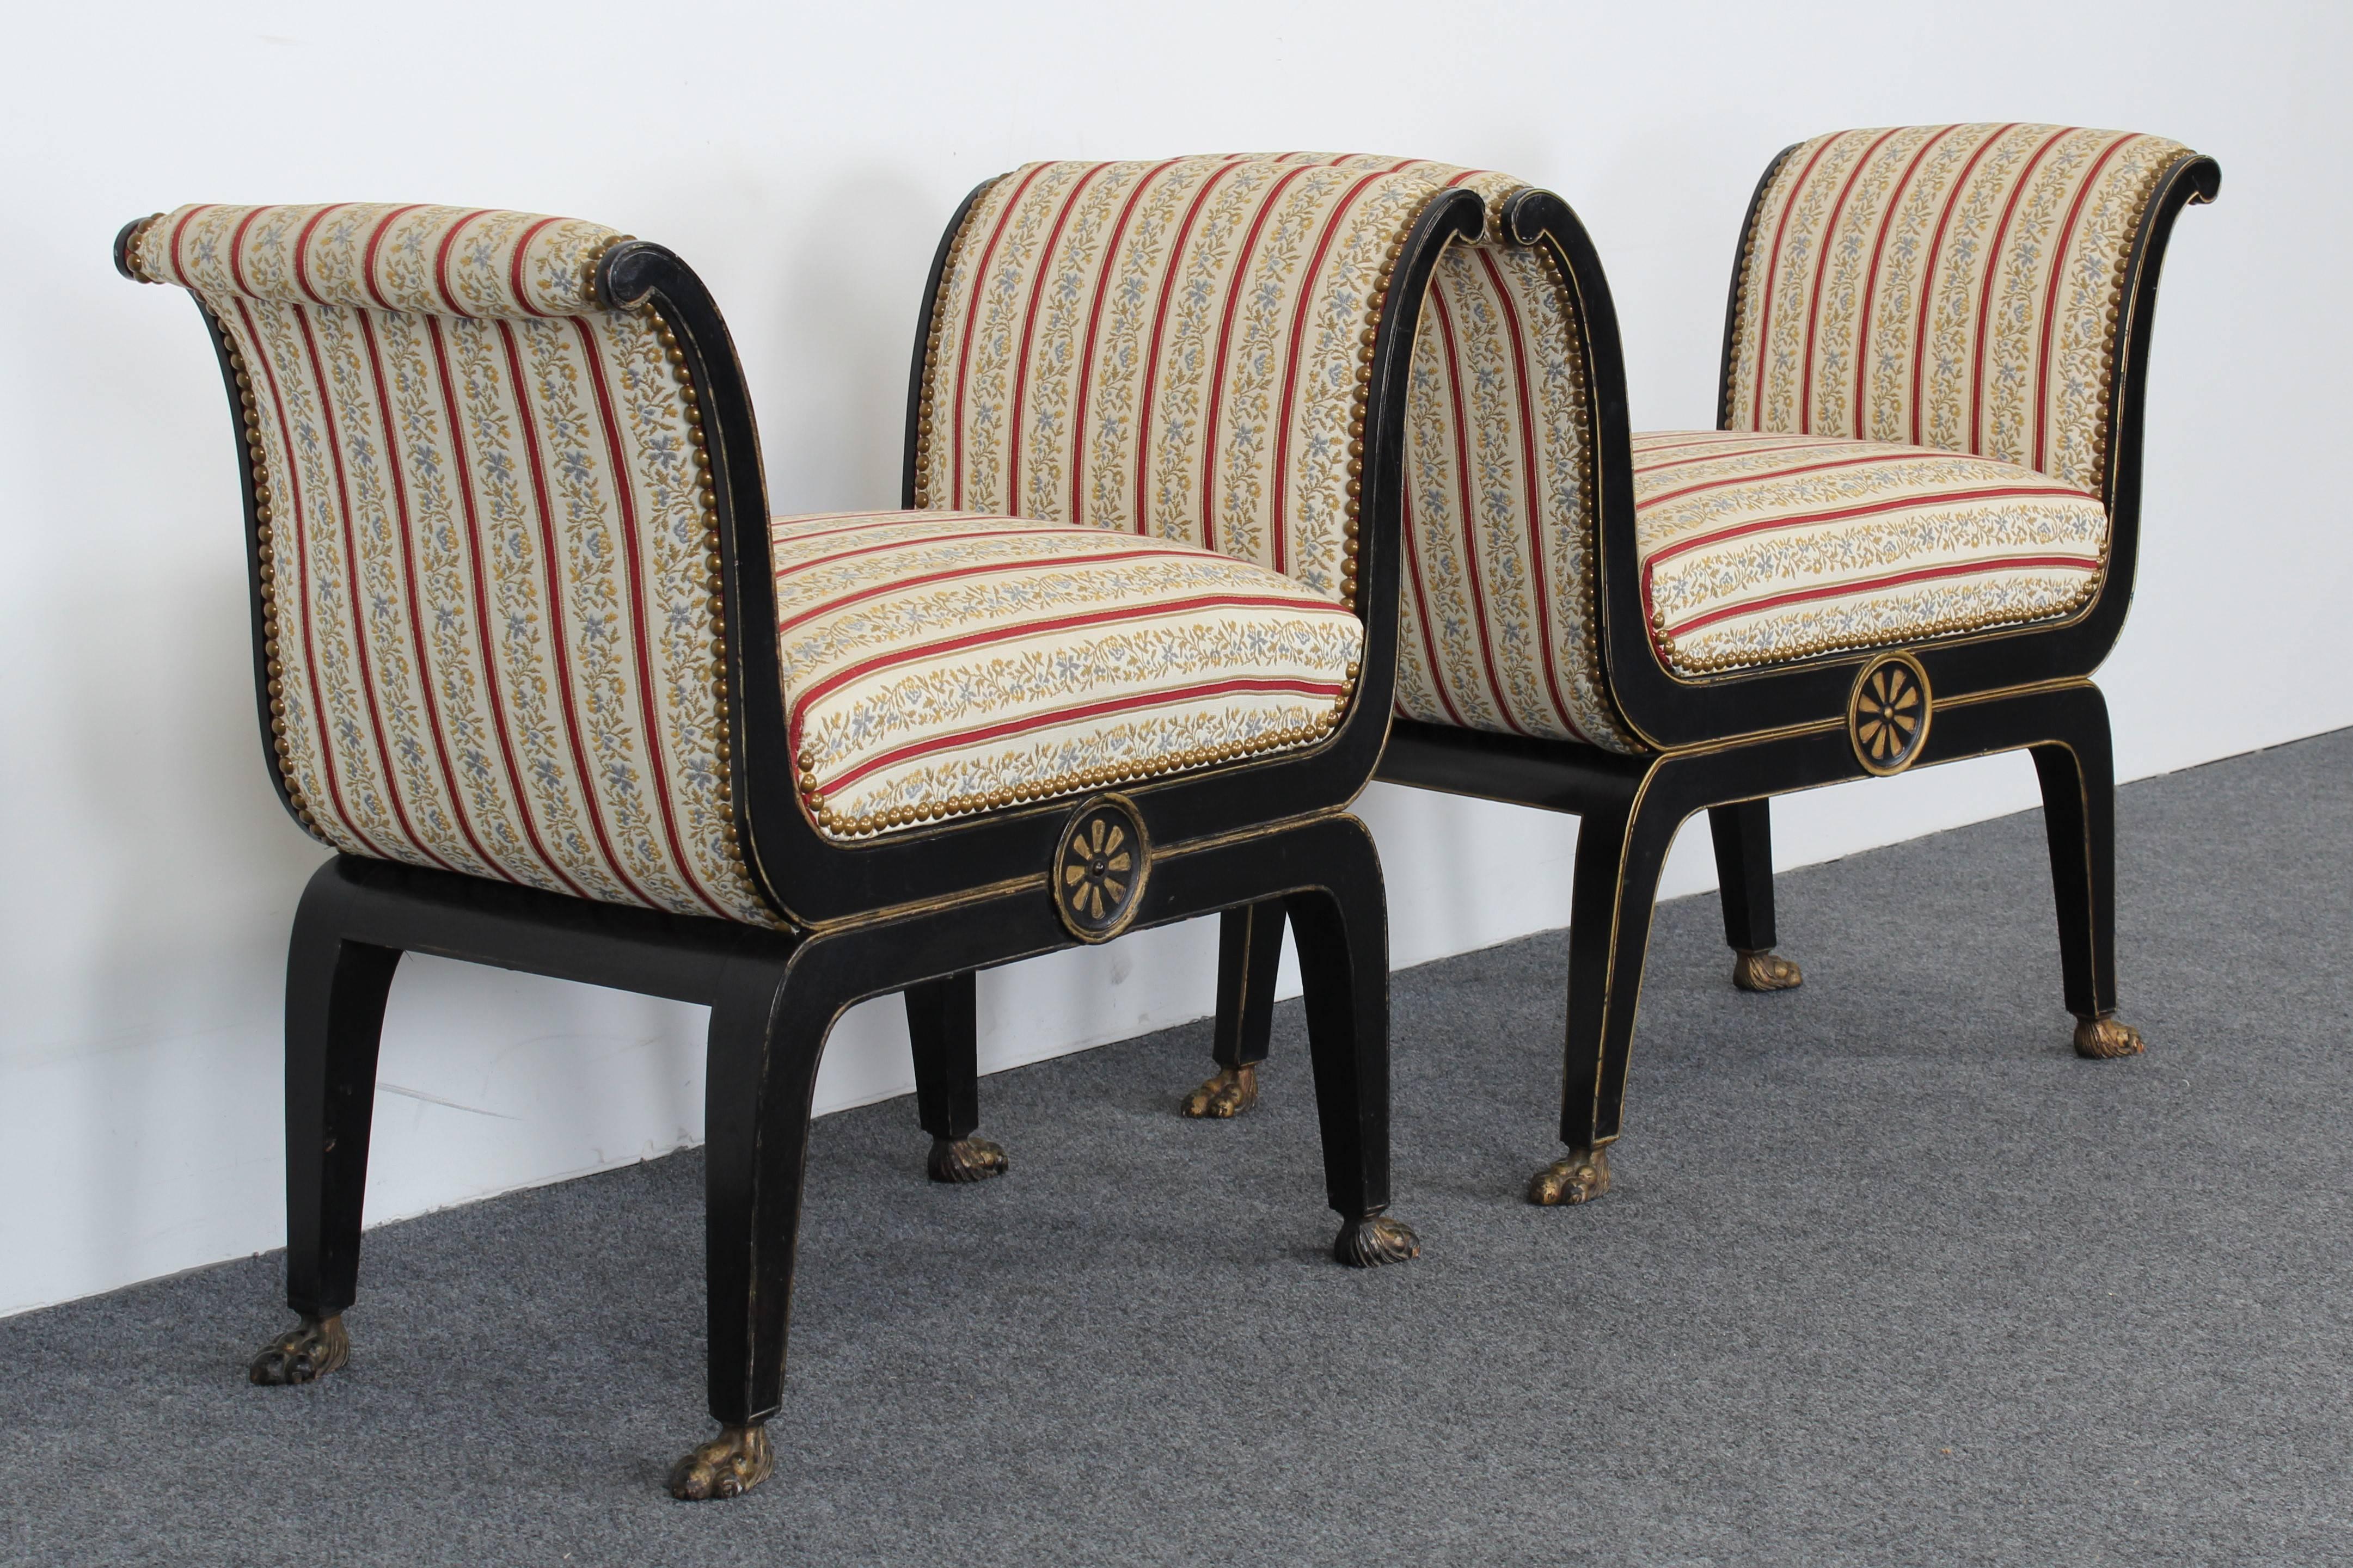 An elegant pair of neoclassical Directoire Regency style ebony and gilt benches with paw feet and decorative motif. Structurally sound with age appropriate wear. Some staining to fabric, new upholstery recommended.